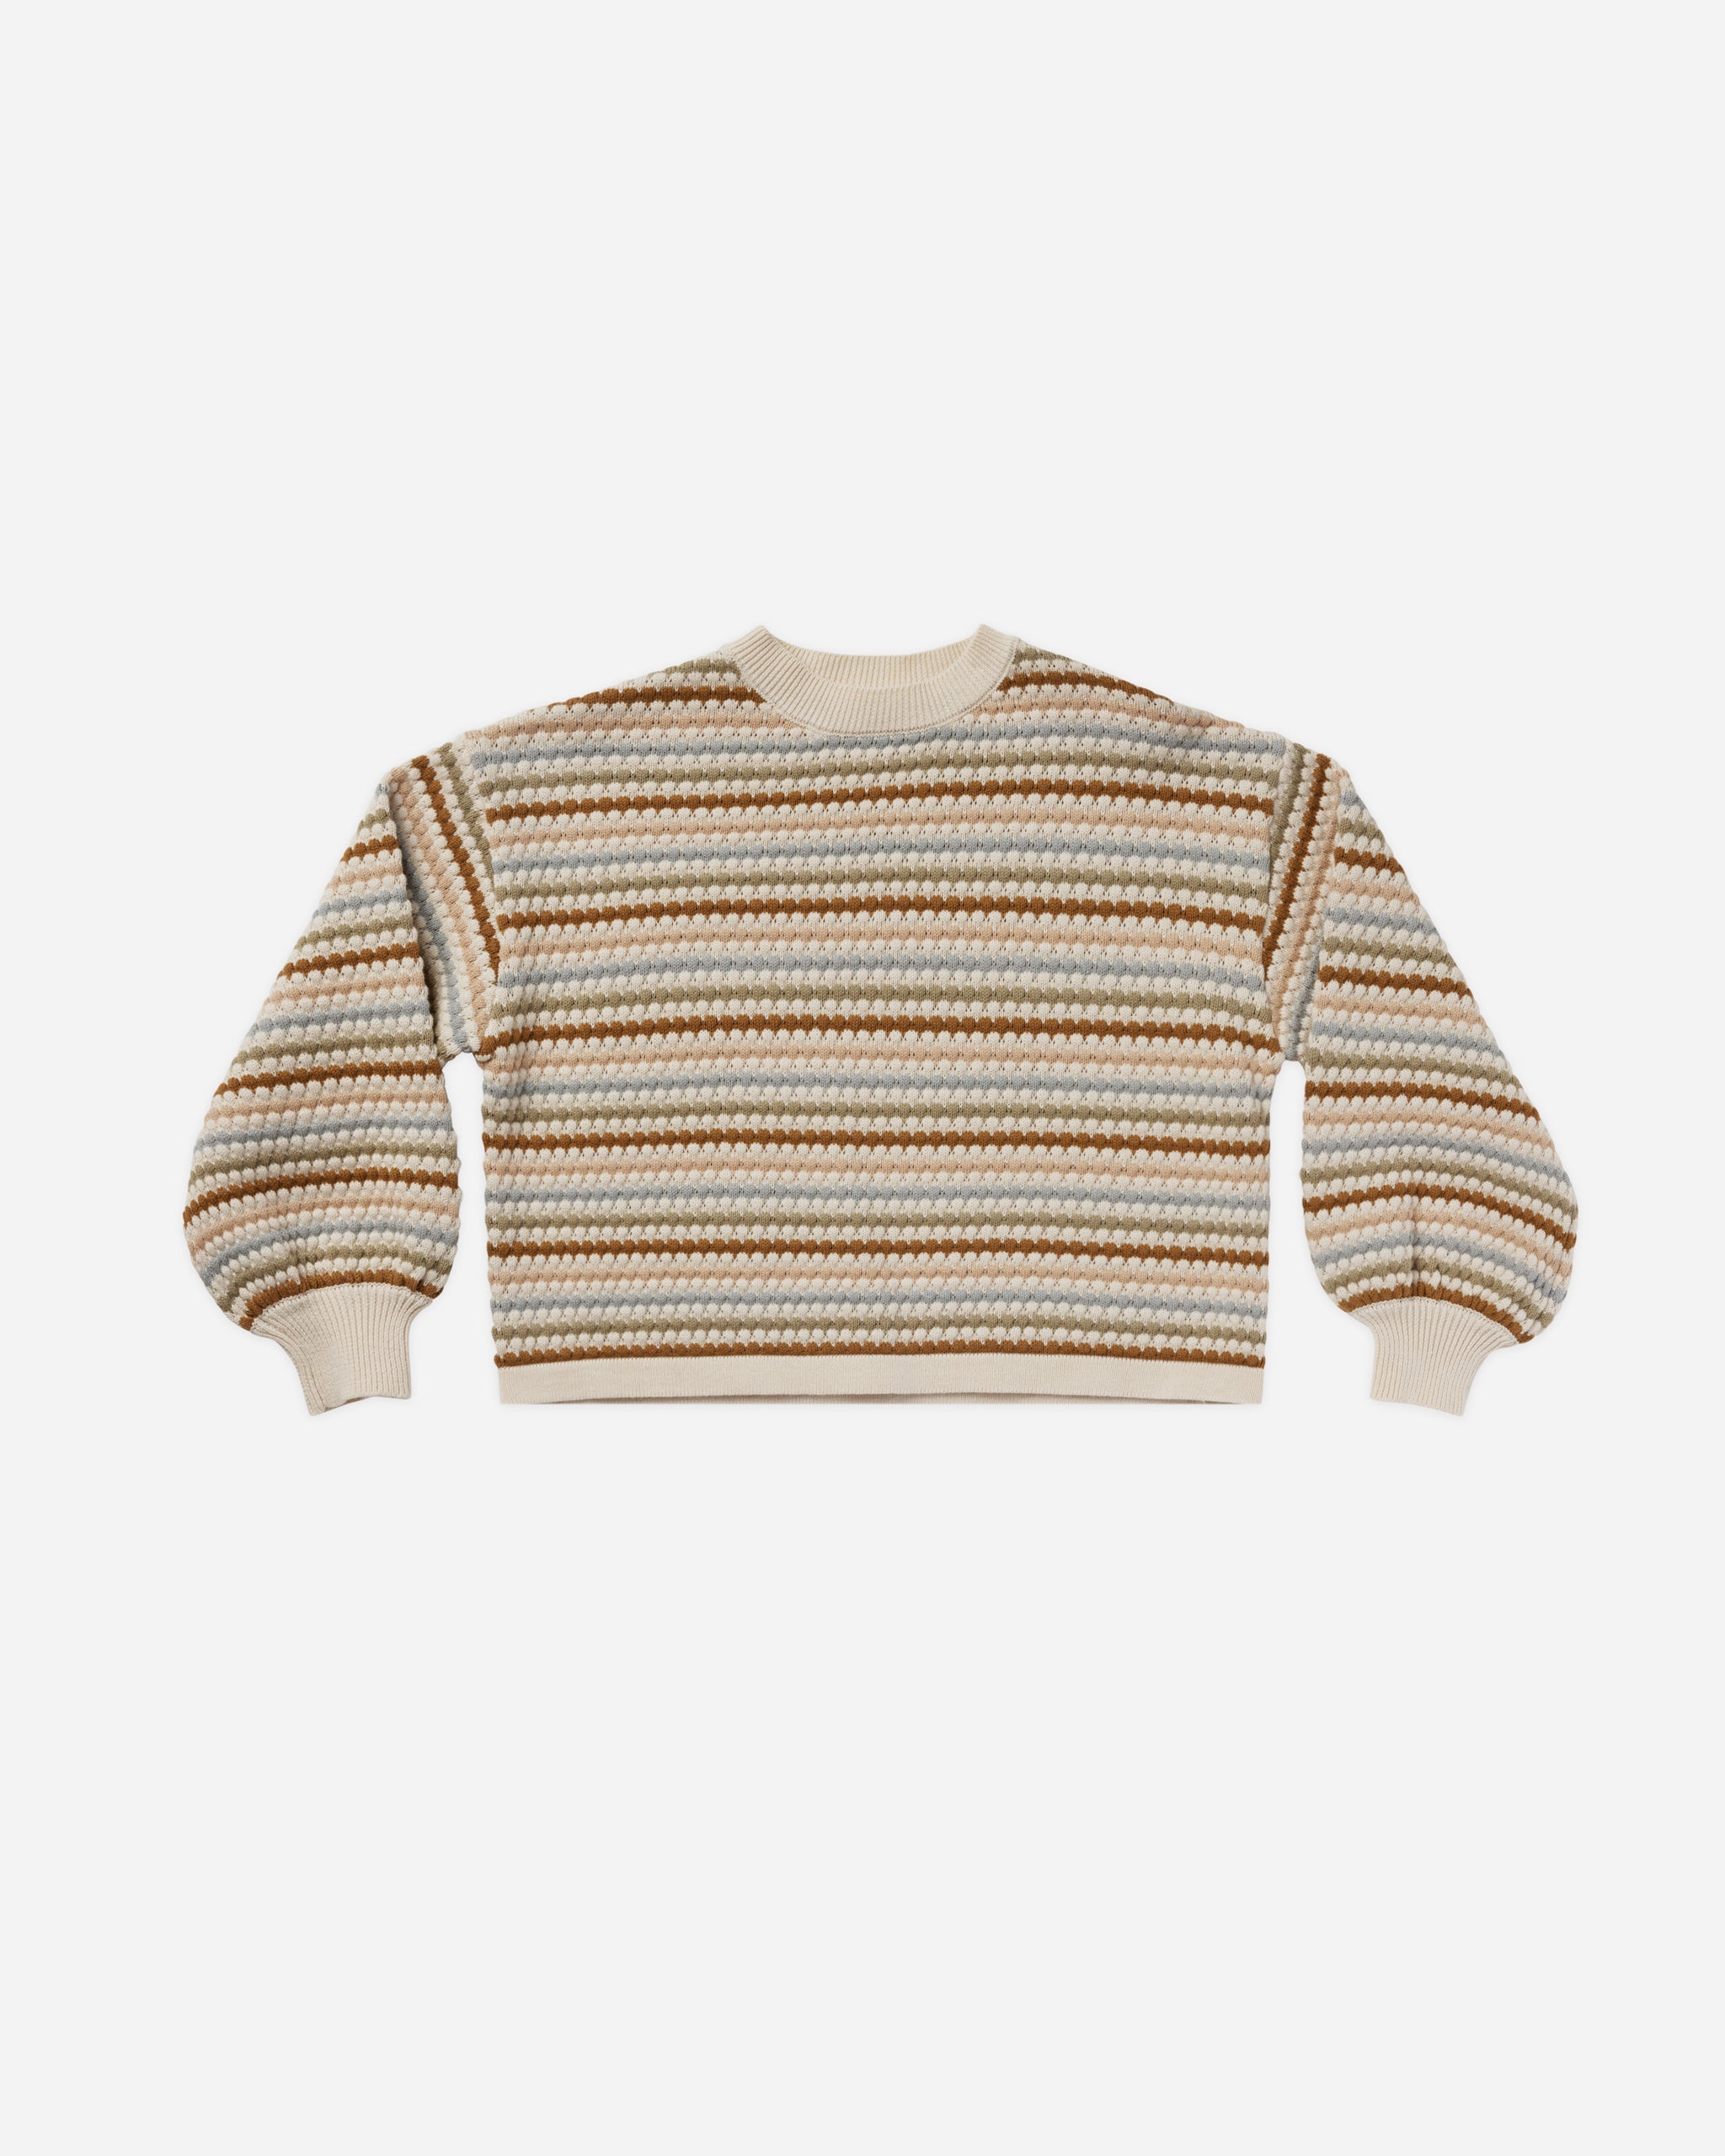 Boxy Crop Sweater || Honeycomb Stripe - Rylee + Cru | Kids Clothes | Trendy Baby Clothes | Modern Infant Outfits |